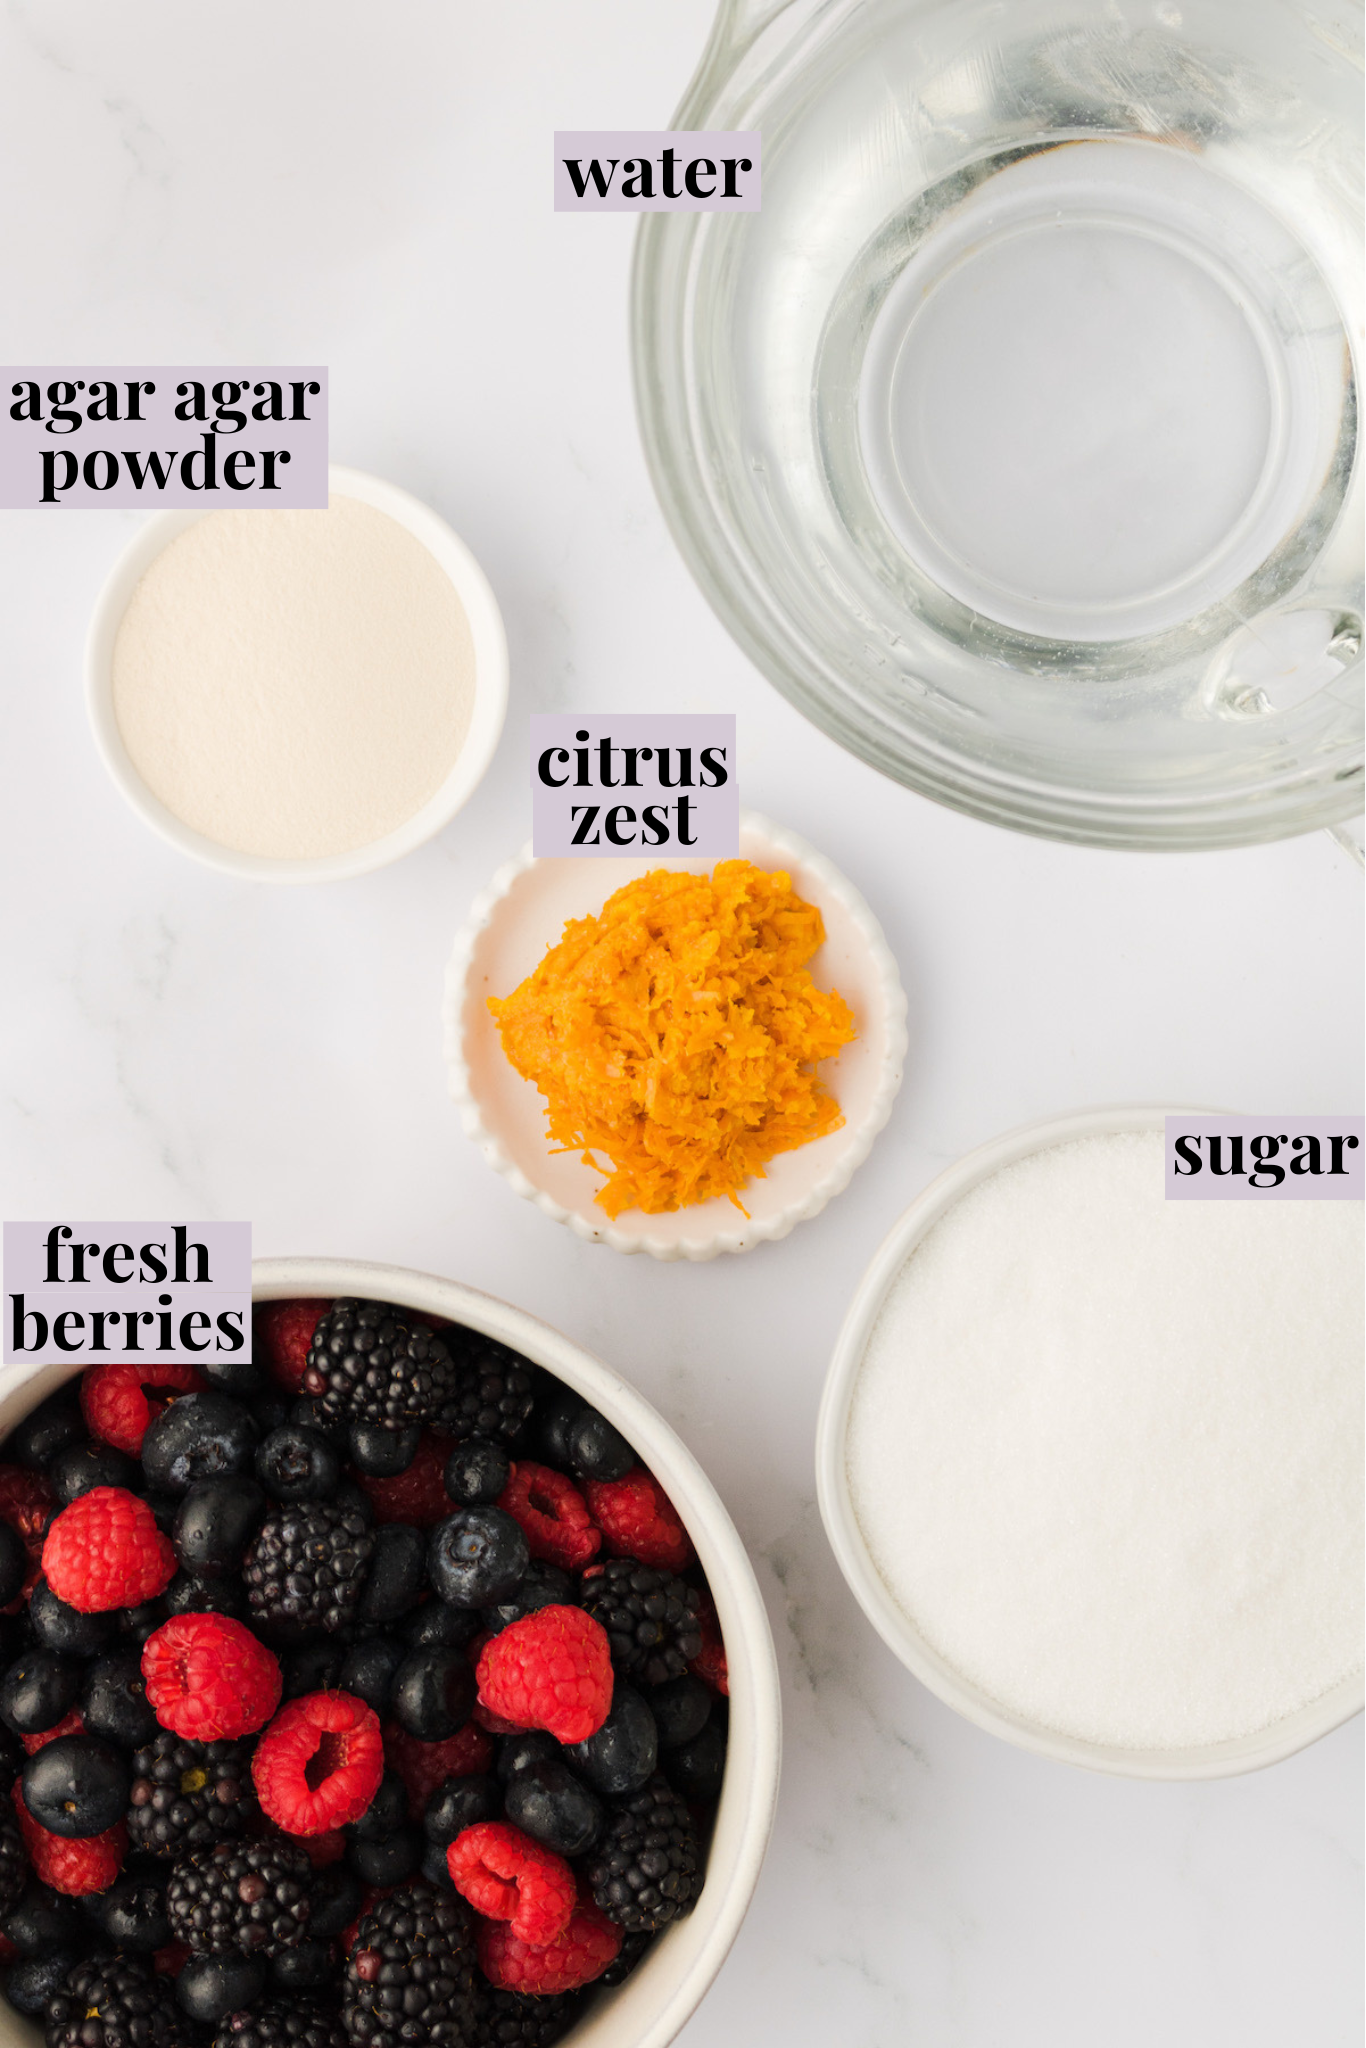 Overhead view of ingredients for congealed fruit salad with labels